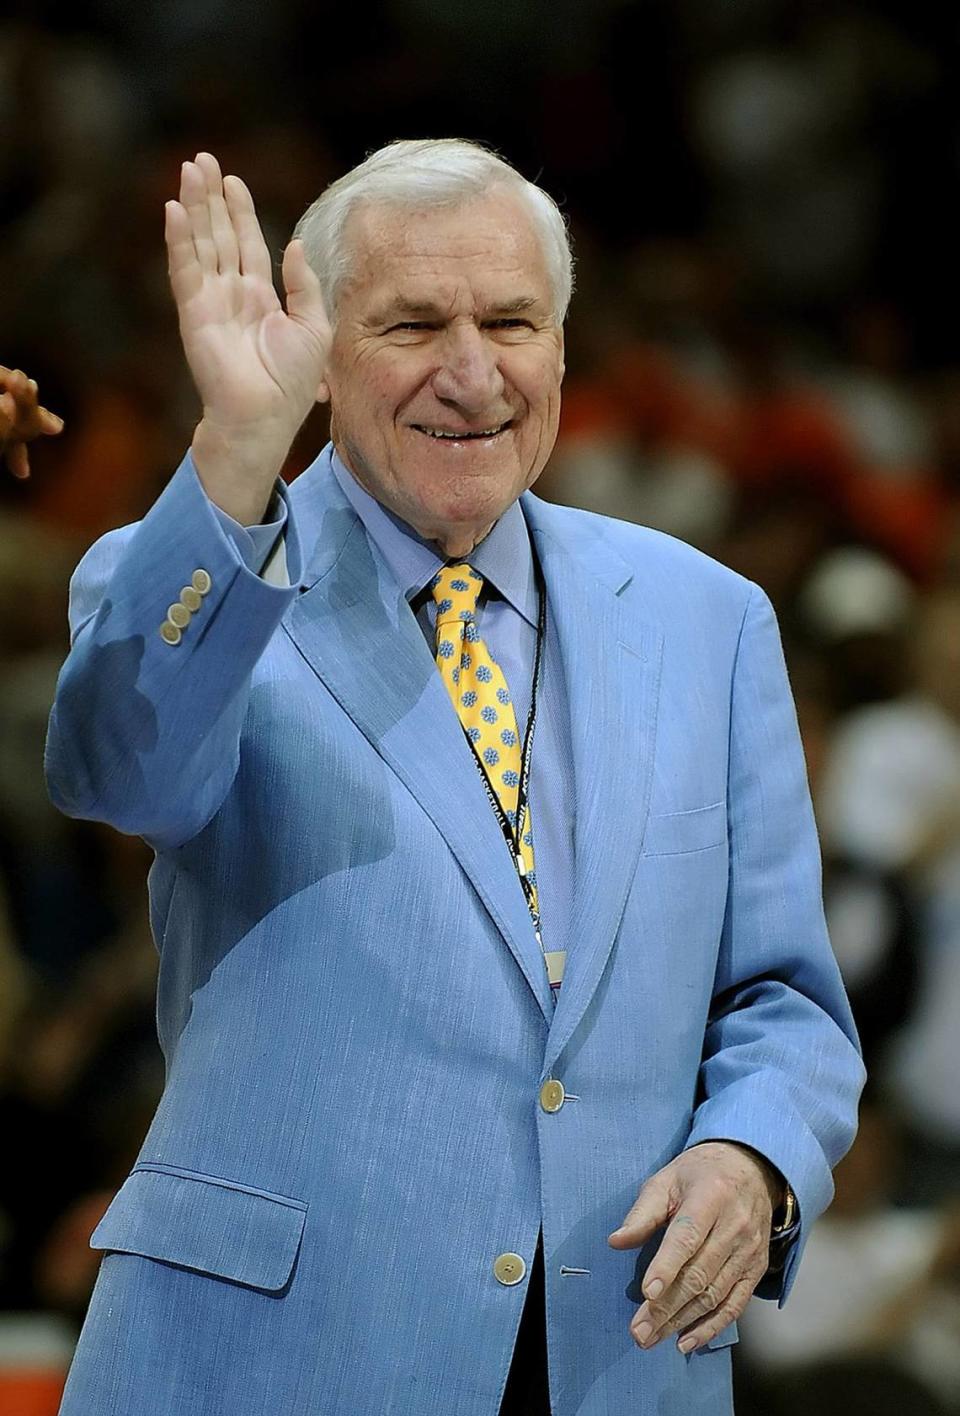 3/15/08 Former UNC Tar Heels head coach Dean Smith acknowledges the cheers of the fans at center court during half time activities in the 2008 ACC Tournament semifinals at Charlotte Bobcats Arena in Charlotte, NC. Smith’s former team the Tar Heels defeated the Hokies 68-66. JEFF SINER -- jsiner@charlotteobserver.com